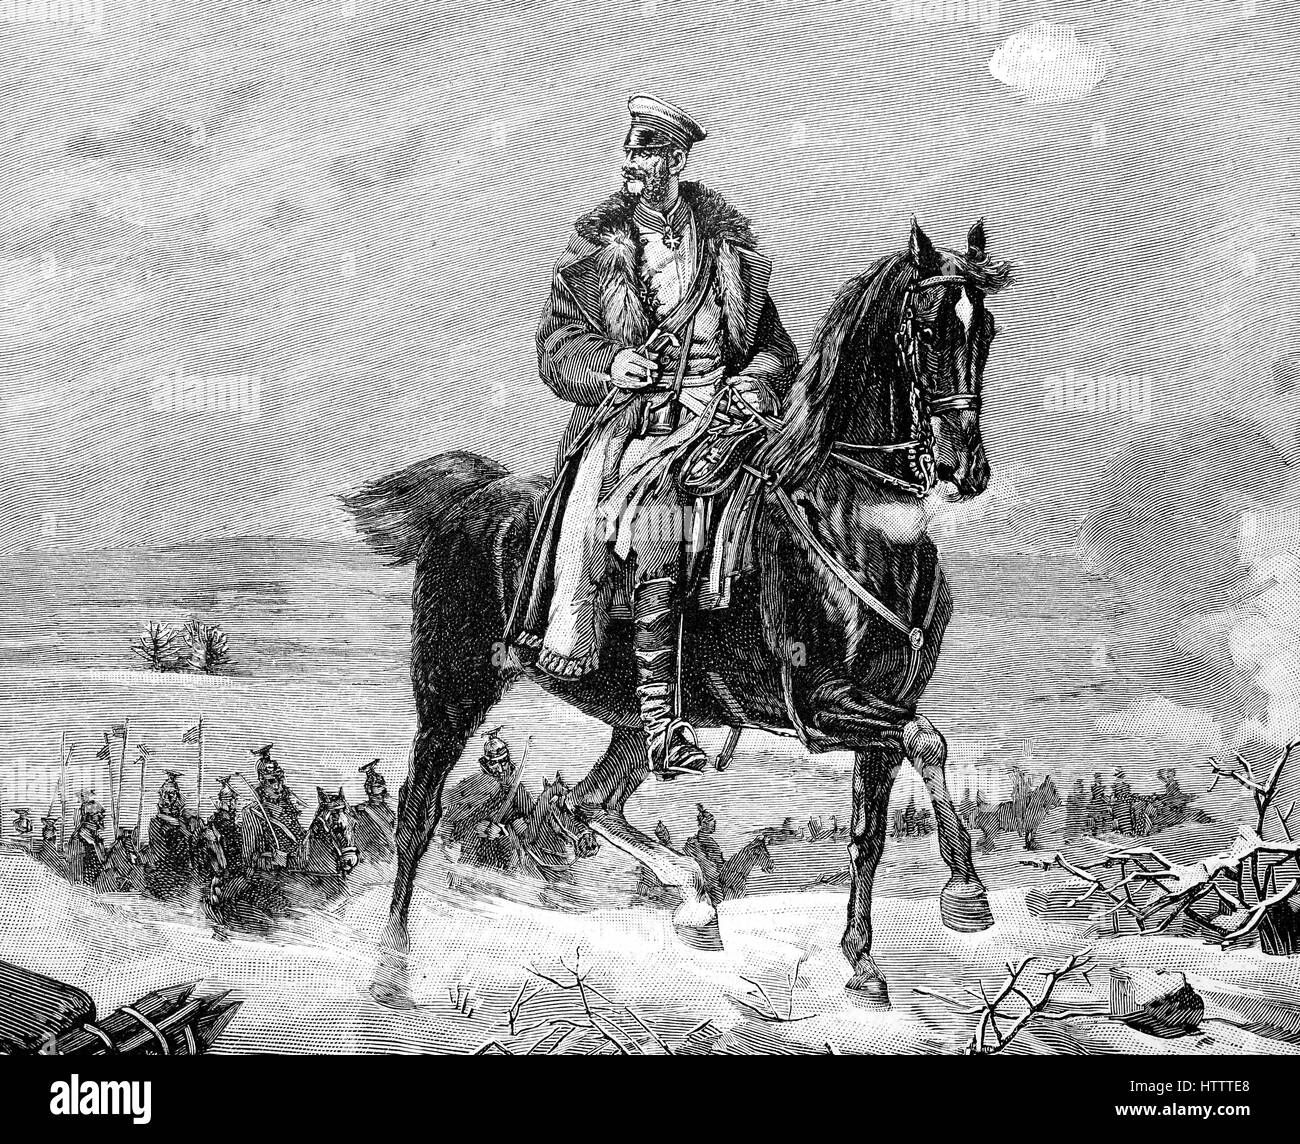 Military people in the Franco-Prussian War 1870 - 1871, Prince Albert of Prussia, Frederick Henry Albert,  Friedrich Heinrich Albrecht; 4 October 1809 - 14 October 1872, was a Prussian colonel general, reproduction of a woodcut from 1882, digital improved Stock Photo